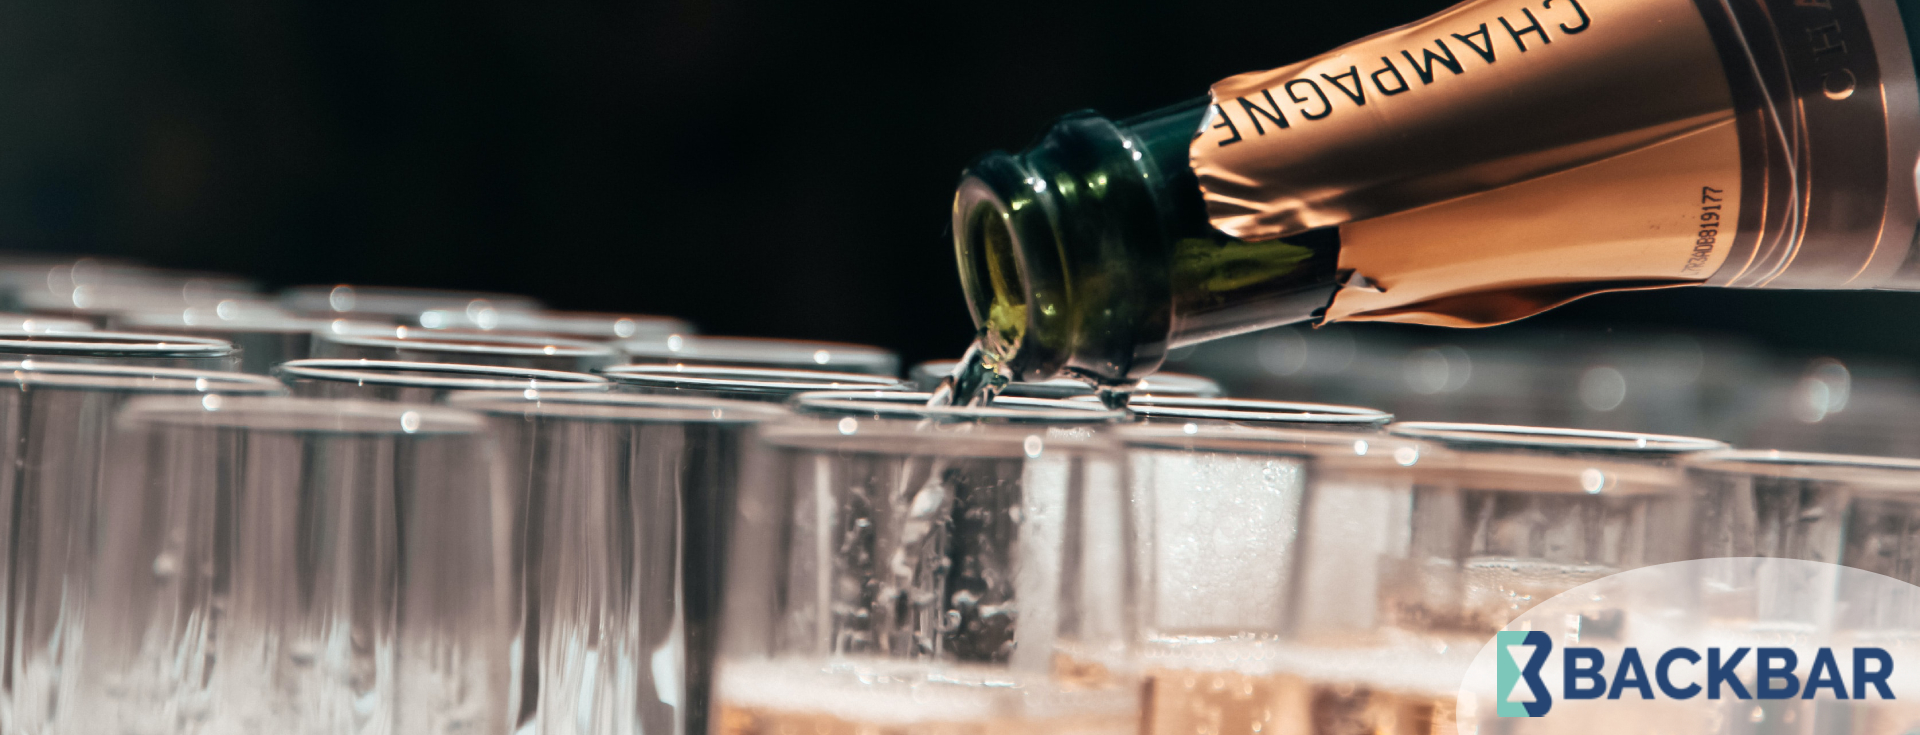 Backbar - How to Maximize Profits on Champagne and Other Sparkling Wines